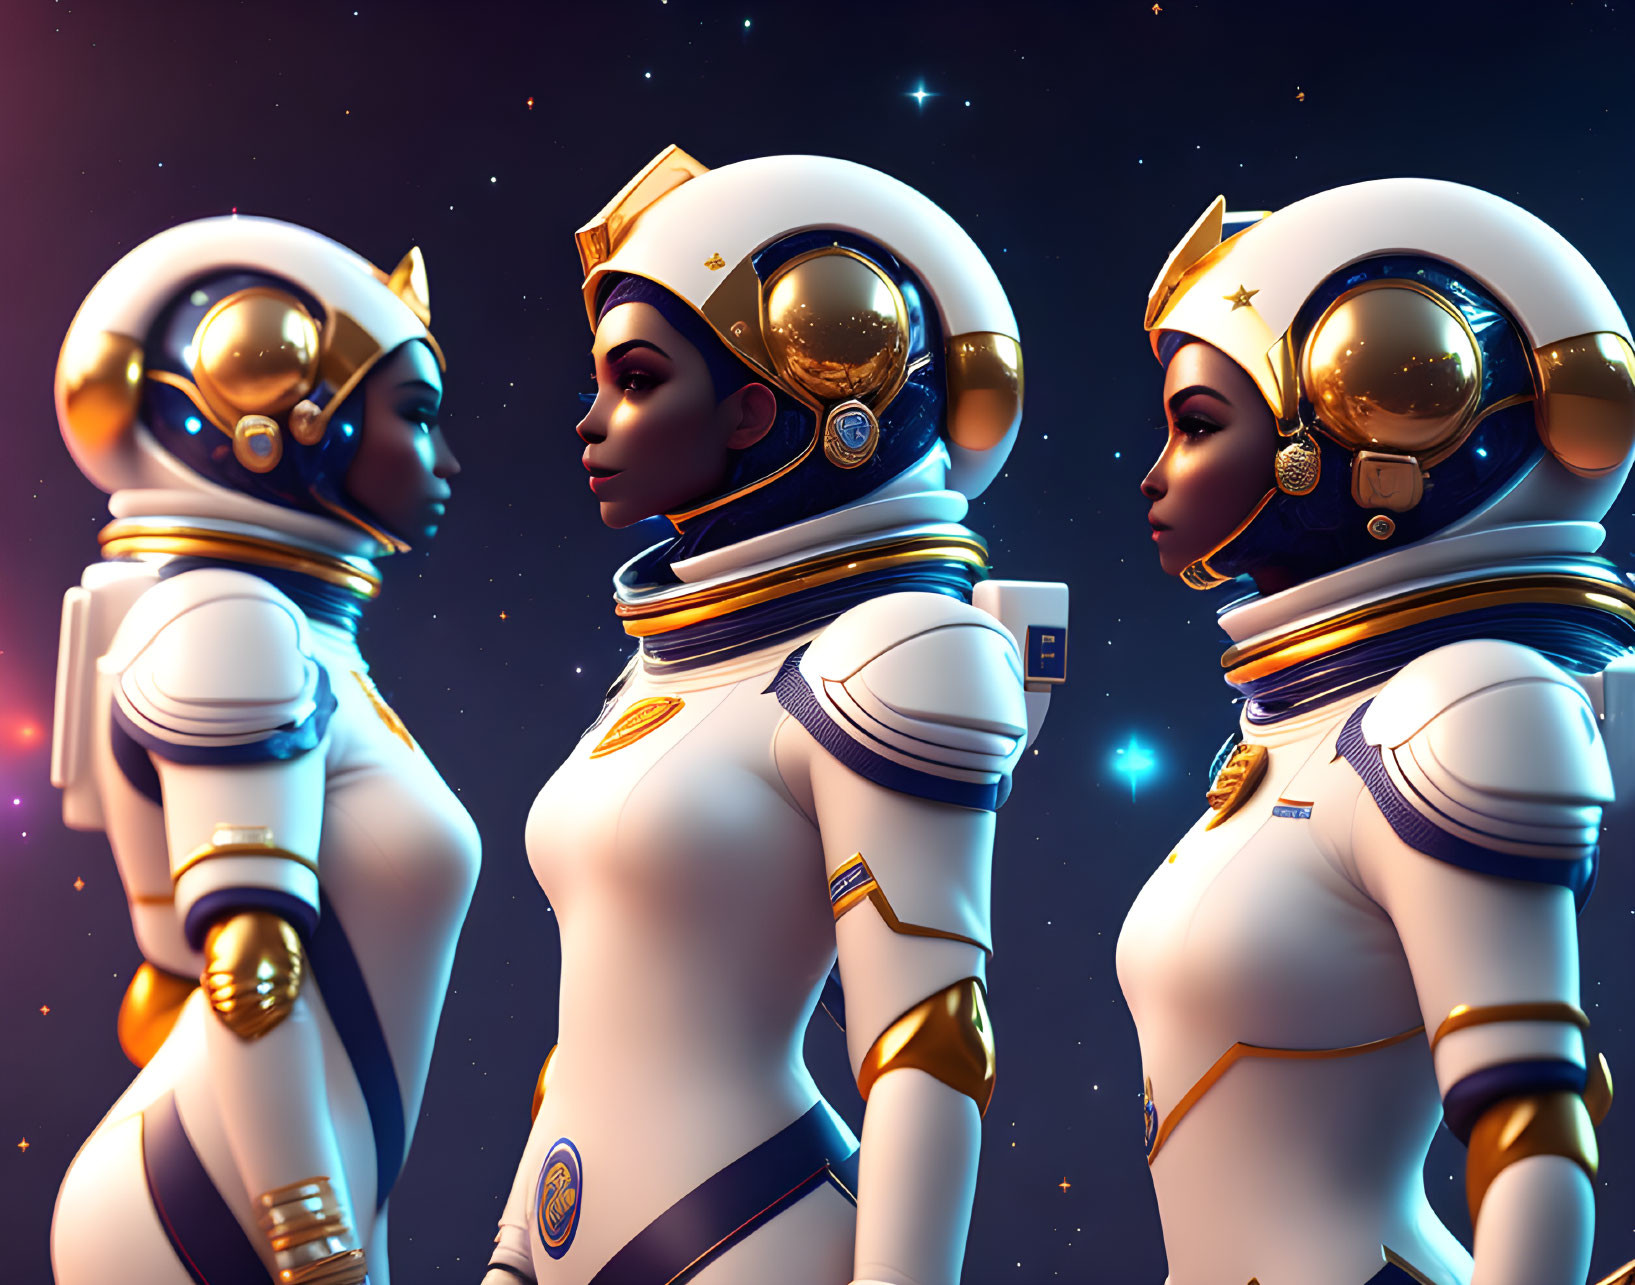 Three female astronauts in white and gold suits on cosmic background